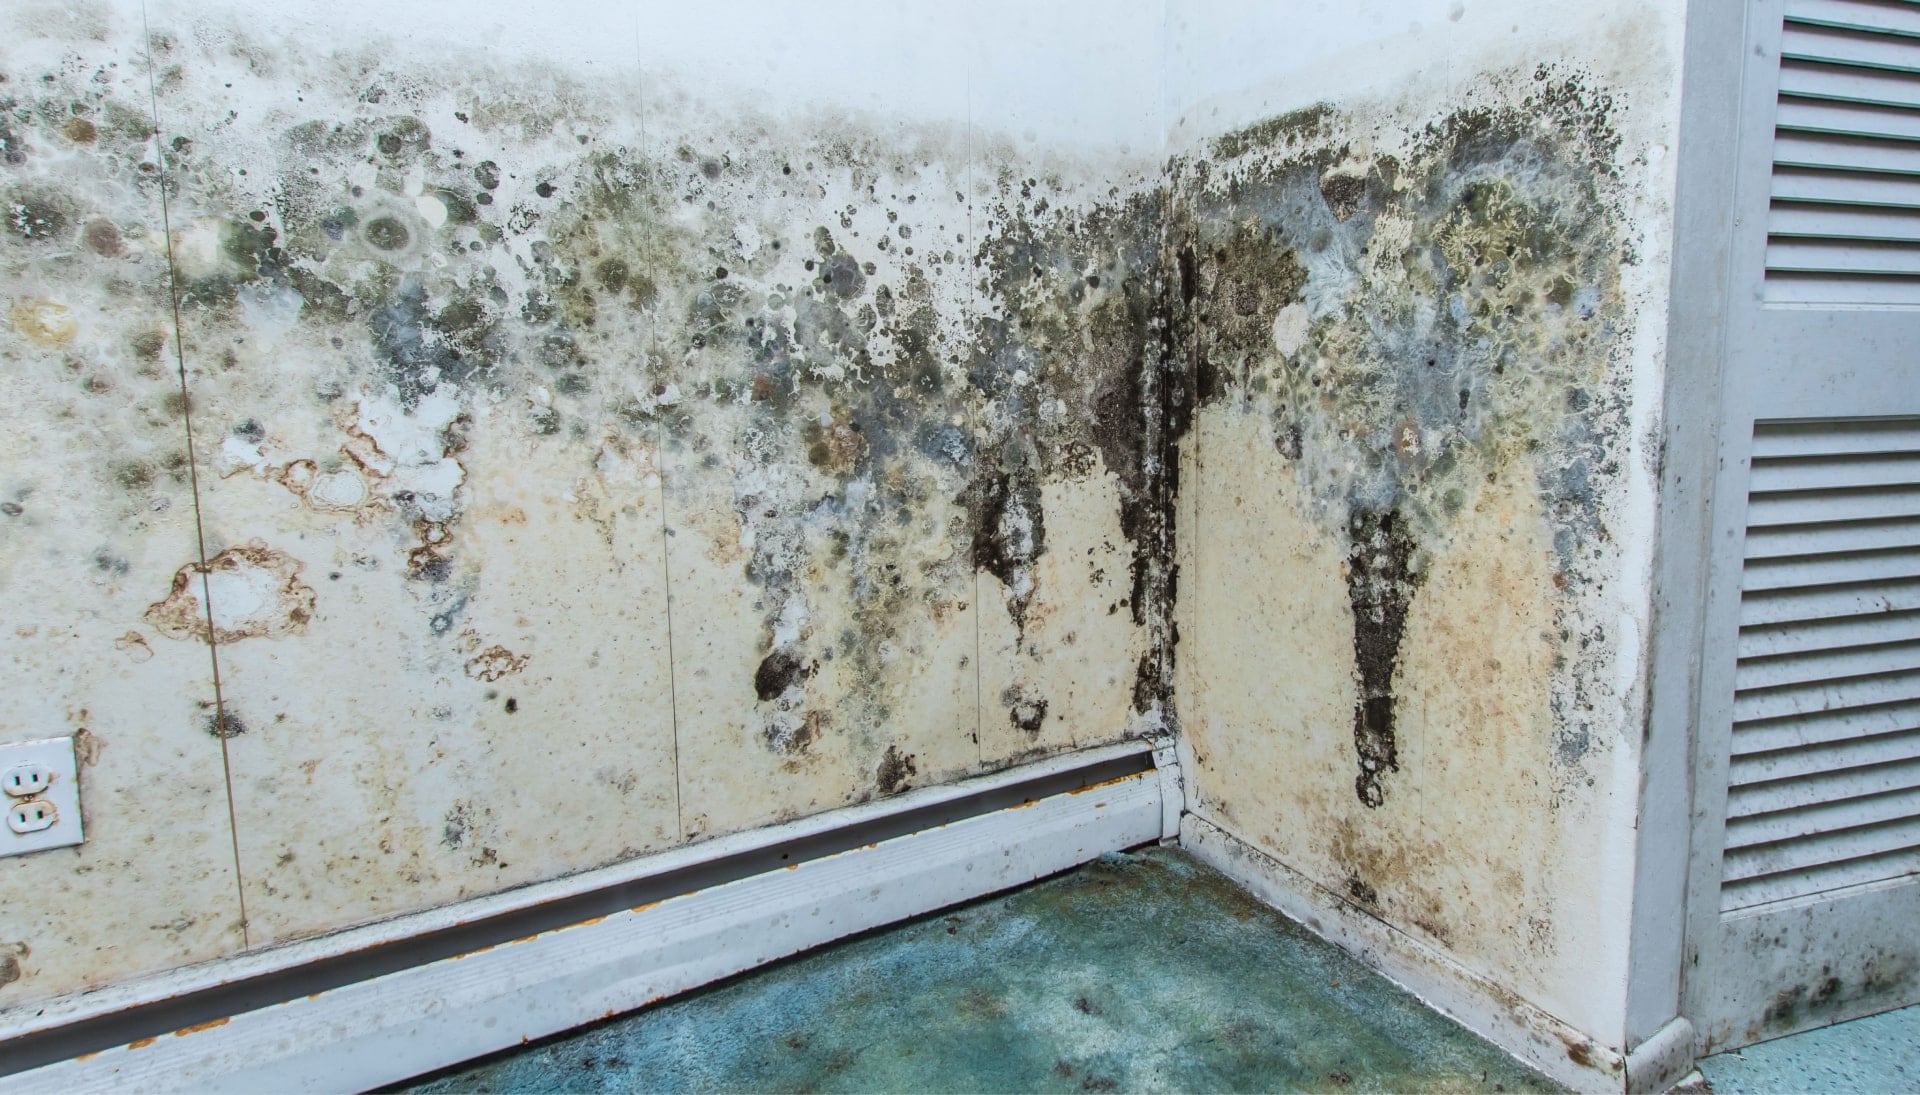 A mold remediation team using specialized techniques to remove mold damage and control odors in a Port St. Lucie property, with a focus on safety and efficiency